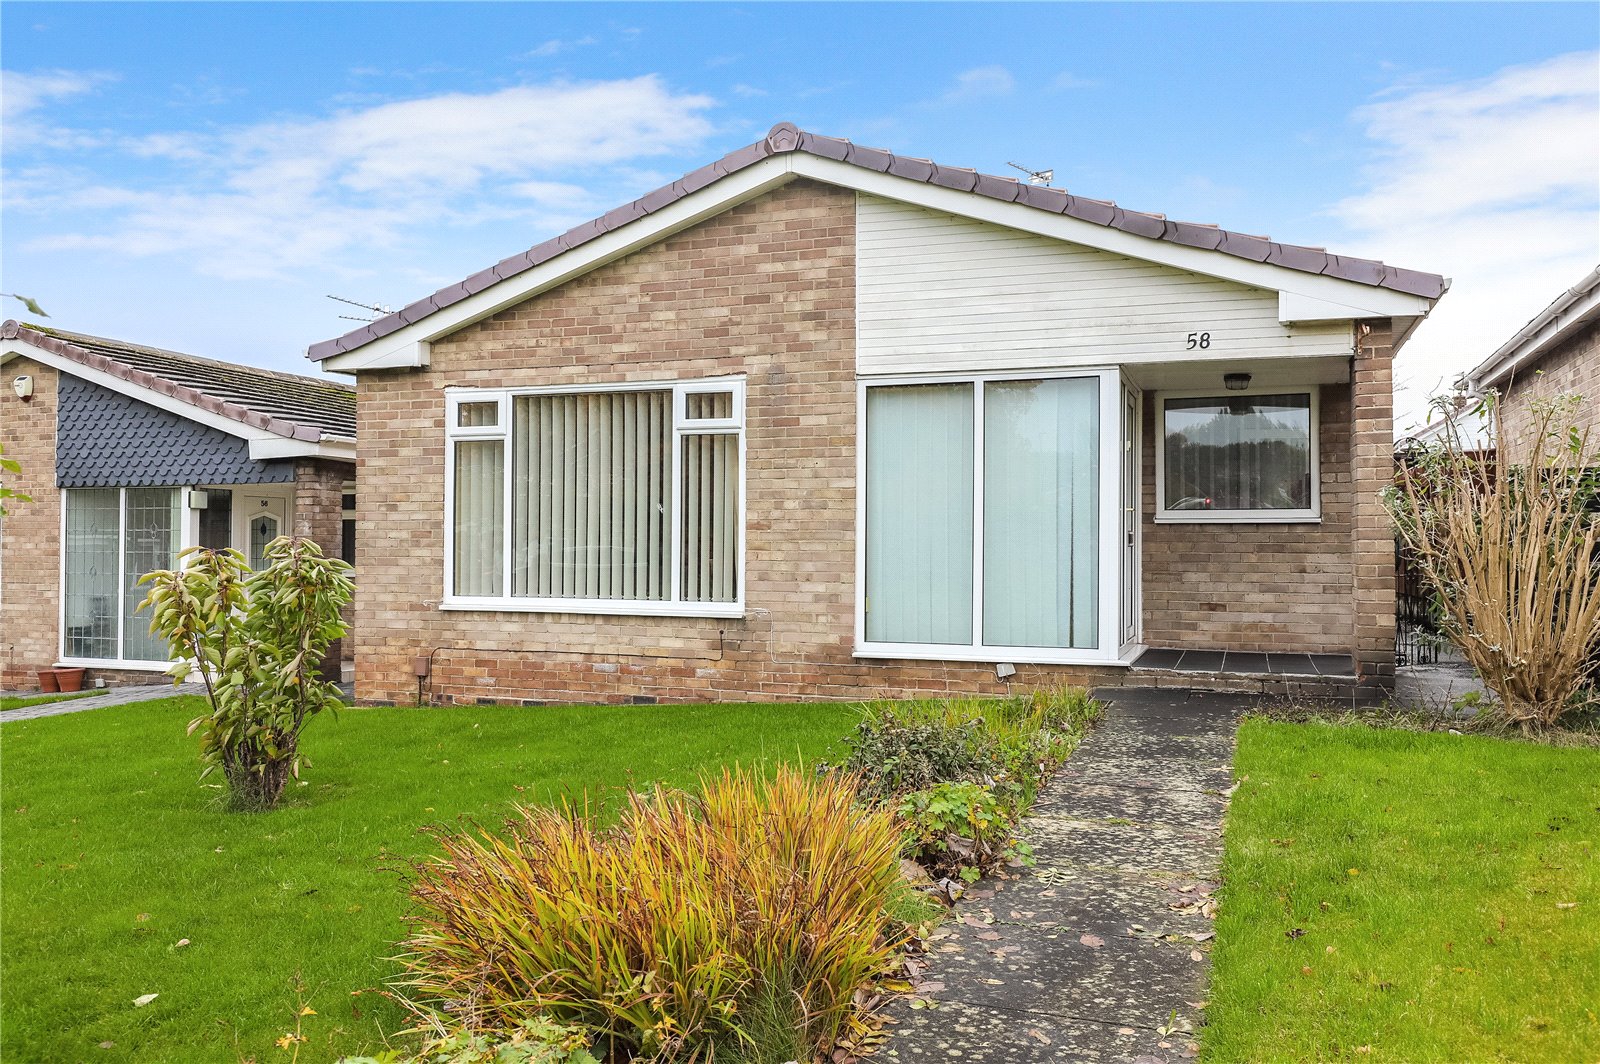 3 bed bungalow for sale - Property Image 1